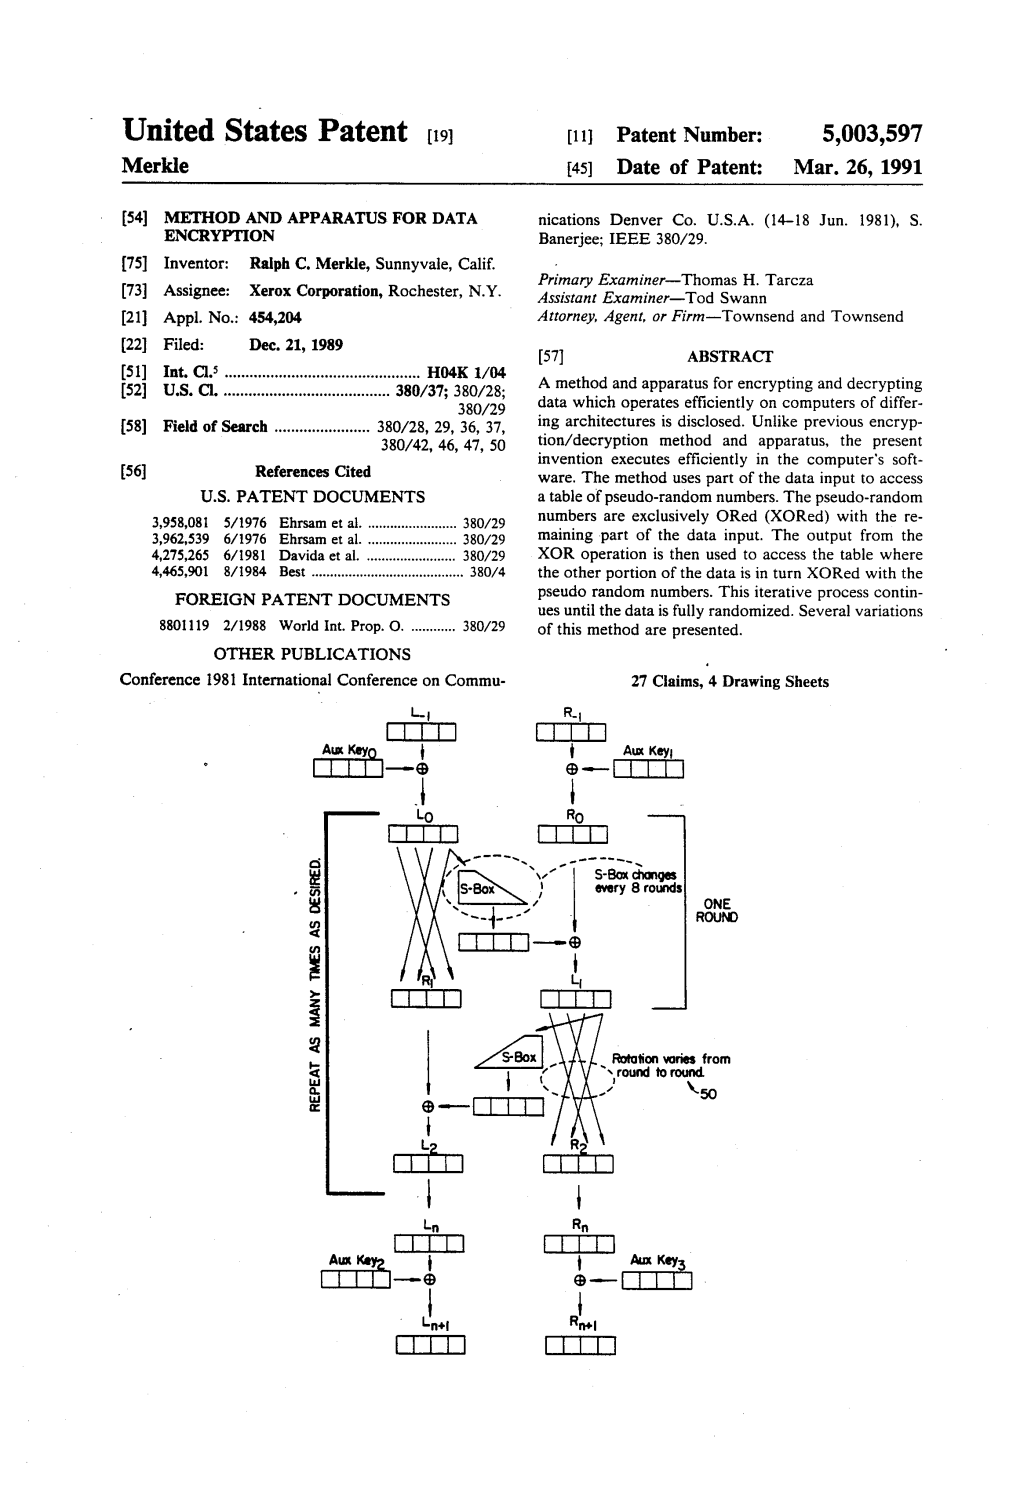 United States Patent (19) 11 Patent Number: 5,003,597 Merkle 45) Date of Patent: Mar